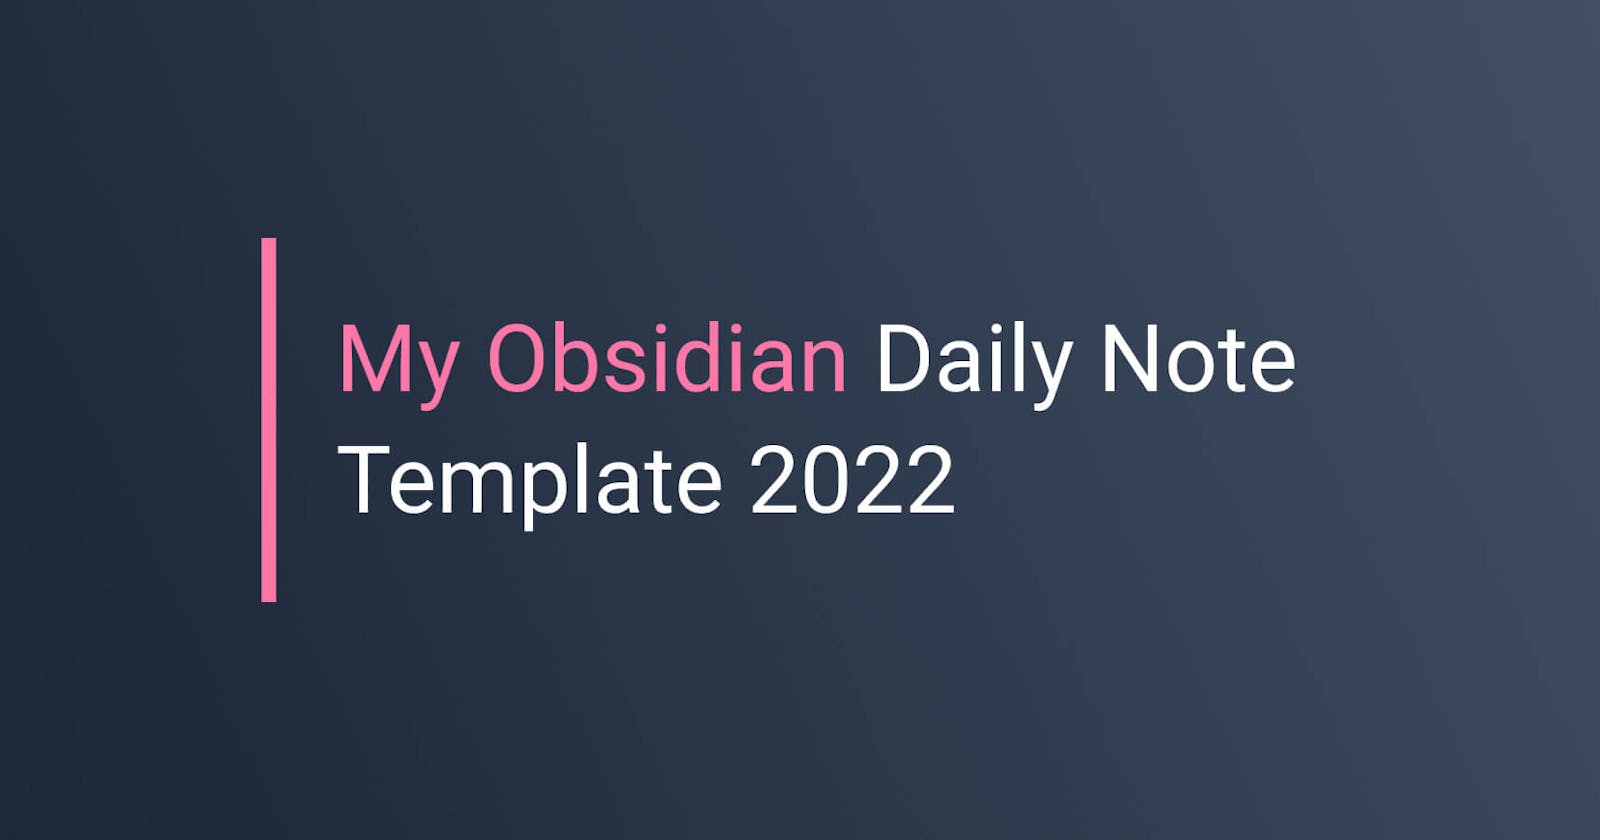 My Obsidian Daily Note Template 2022